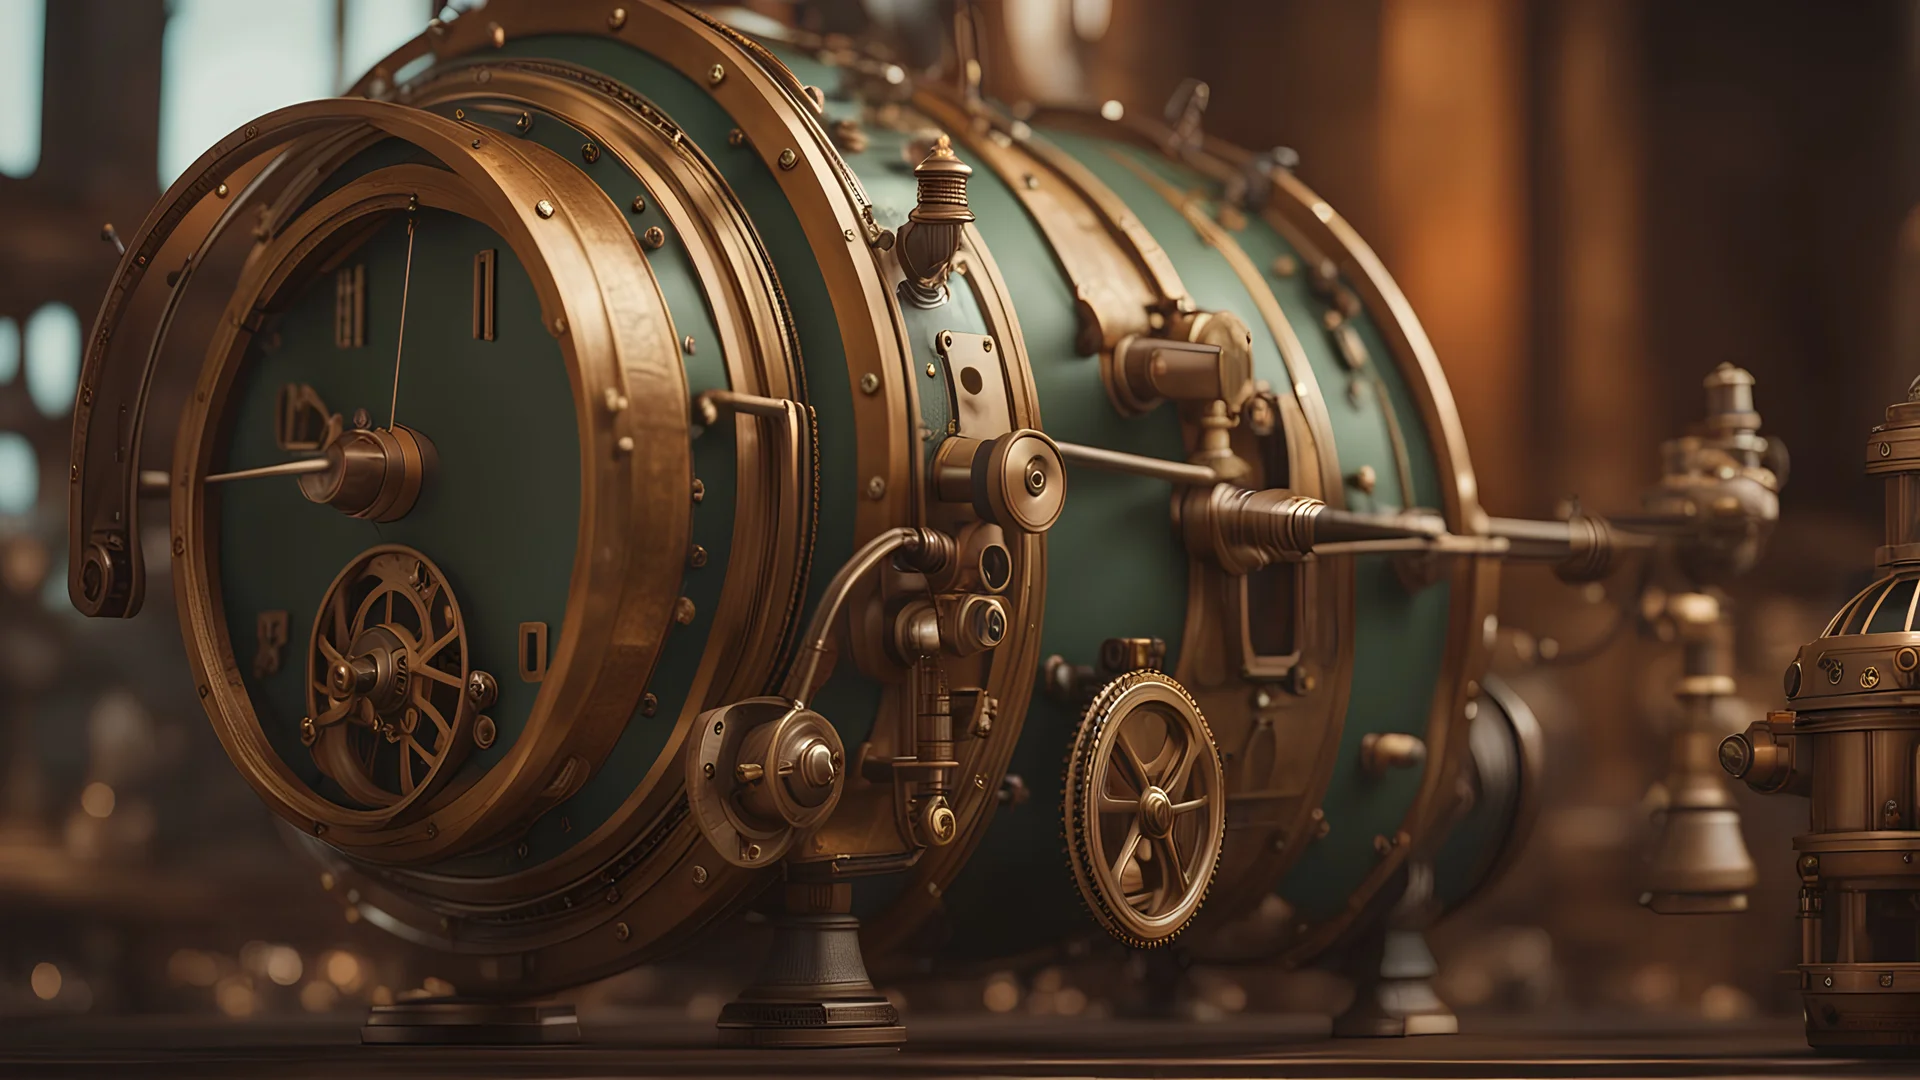 A large green and gold machine with many cogs and wheels. - Steampunk